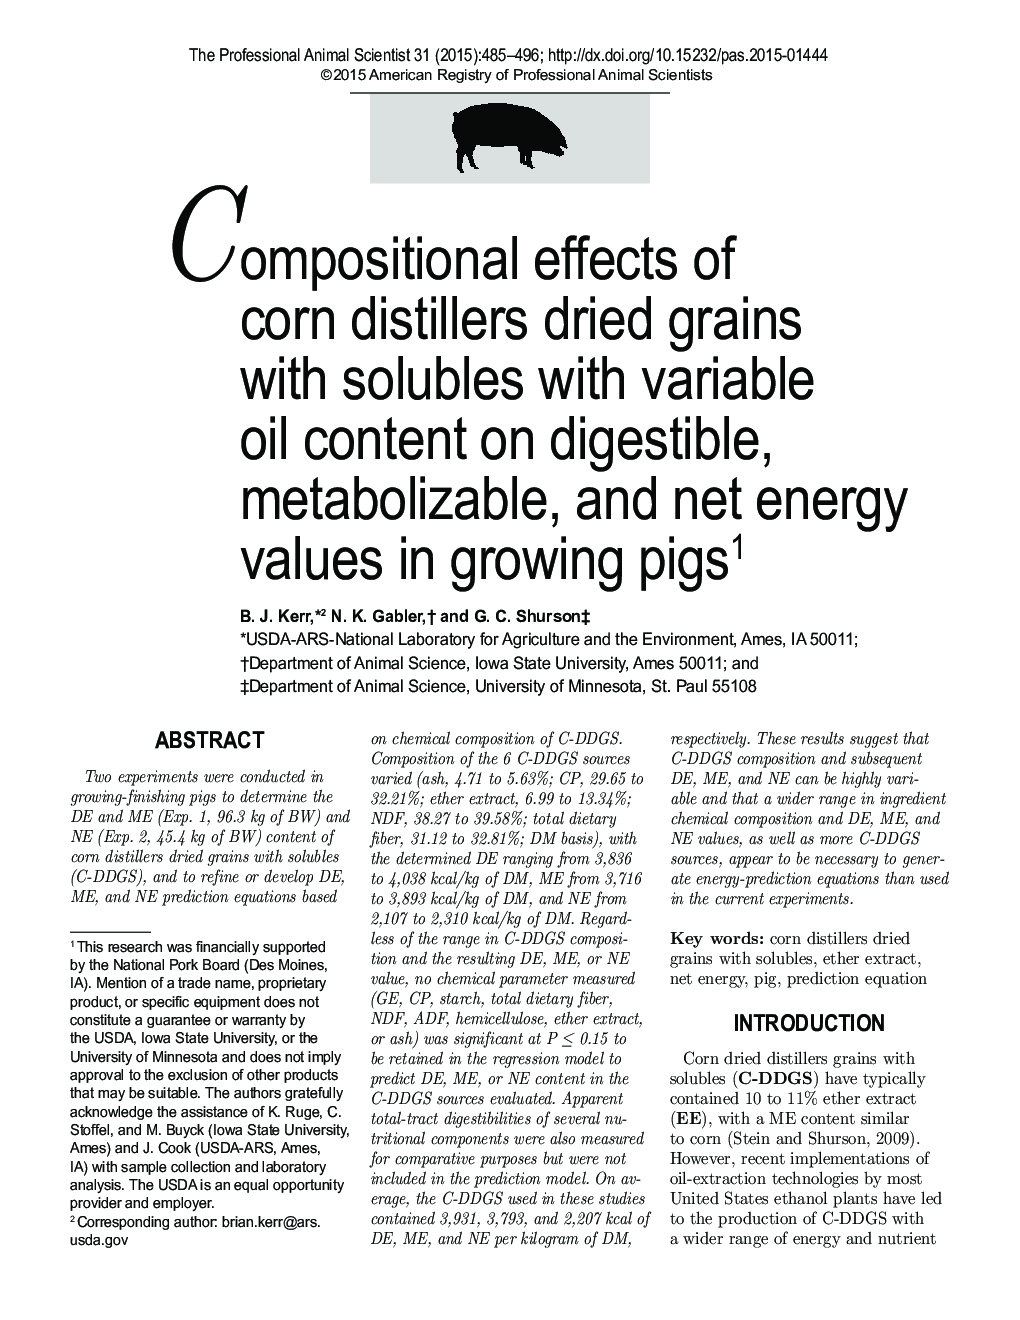 Compositional effects of corn distillers dried grains with solubles with variable oil content on digestible, metabolizable, and net energy values in growing pigs1